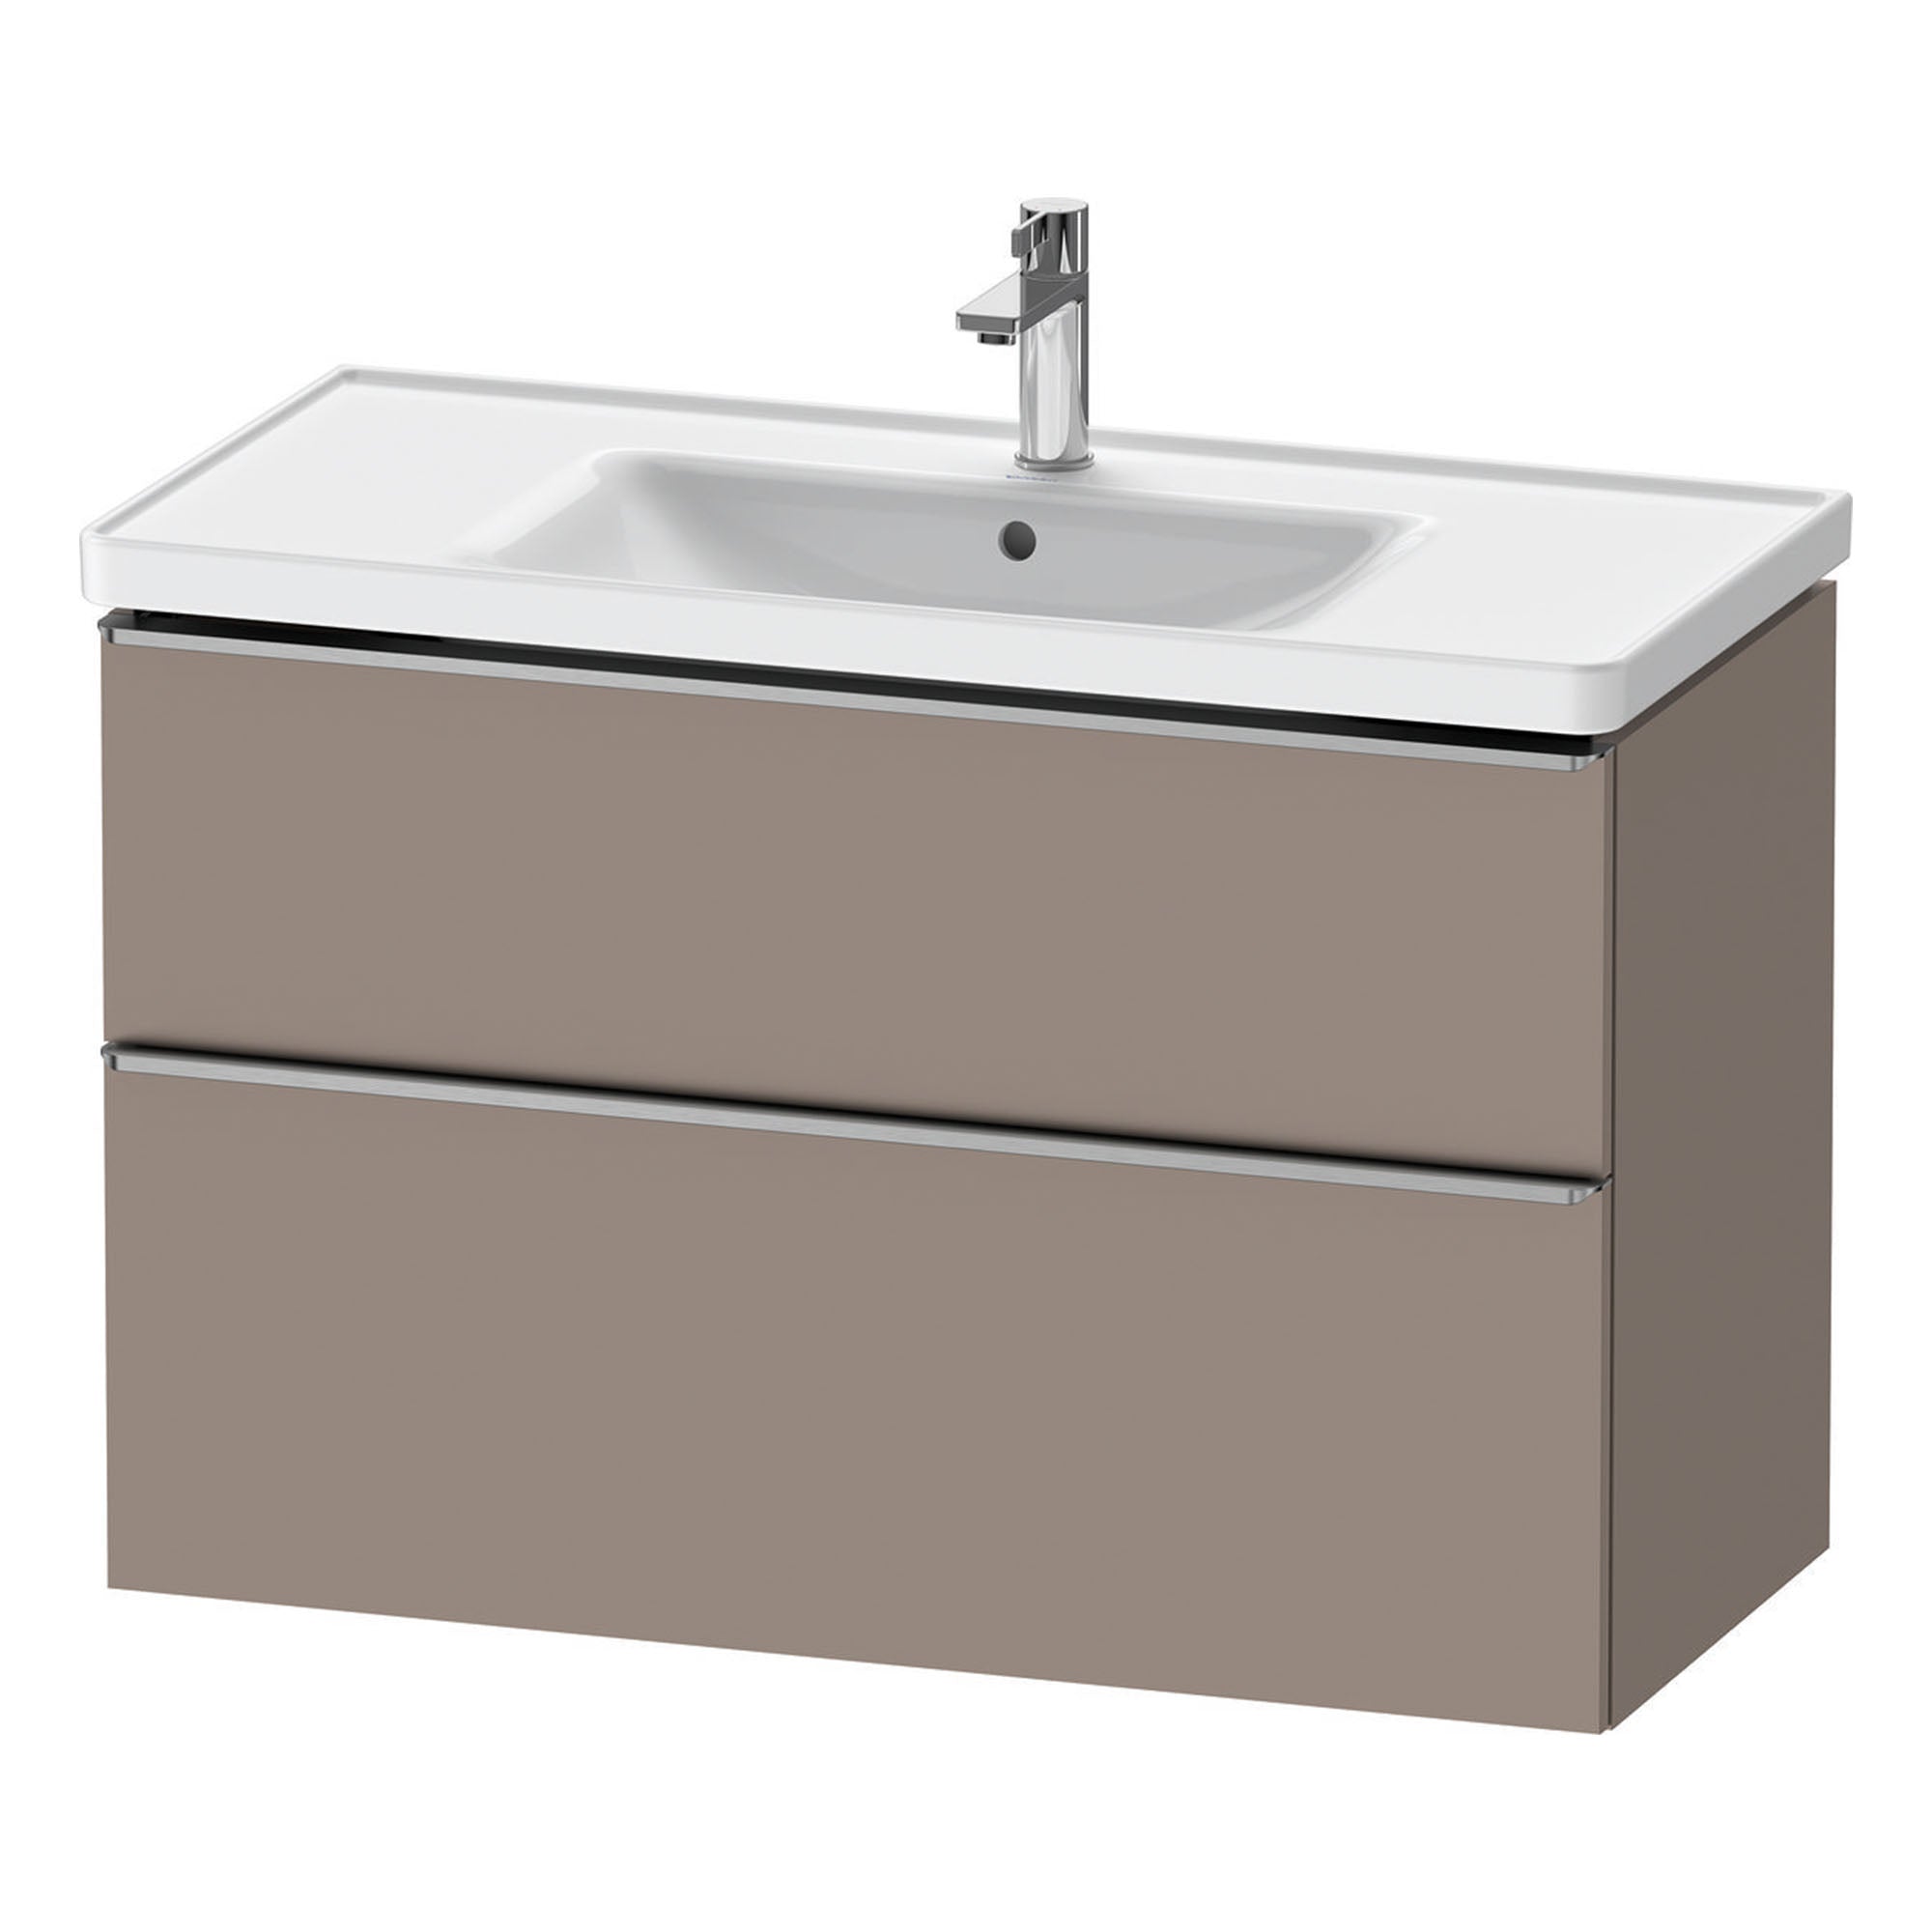 duravit d-neo 1000mm wall mounted vanity unit with d-neo basin basalt stainless steel handles